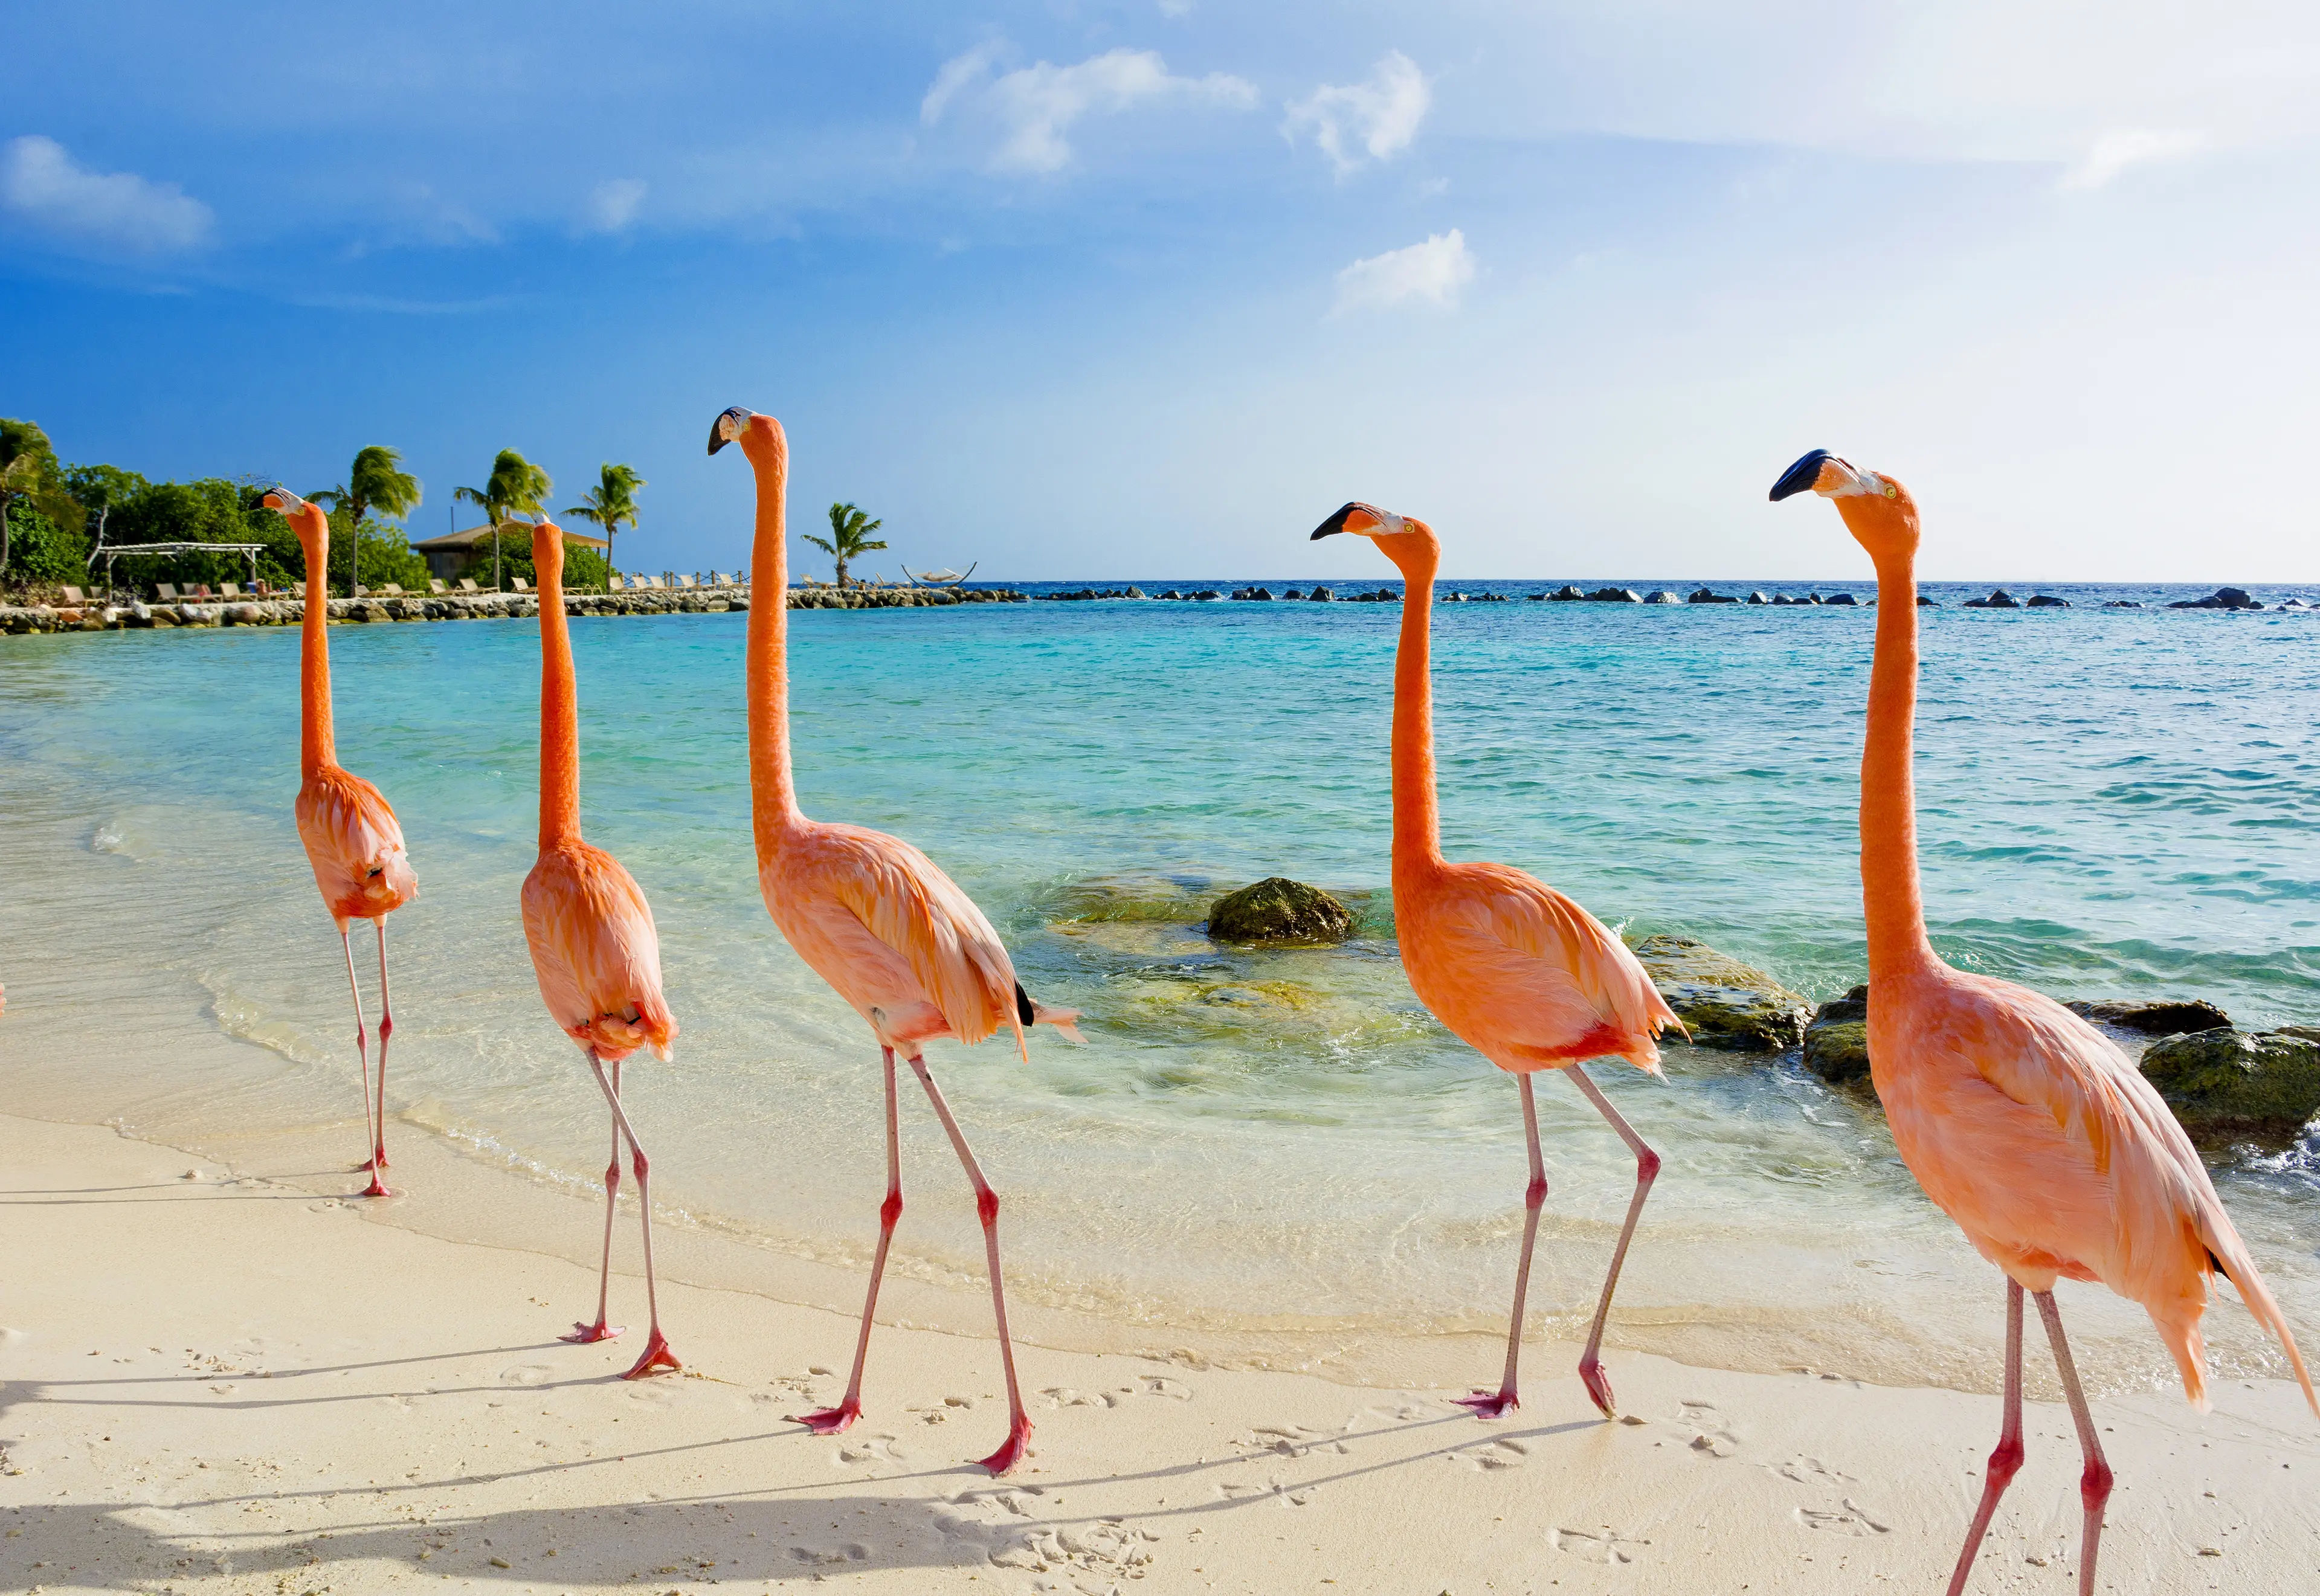 4-Day Romantic Outdoor Adventure and Sightseeing in Aruba